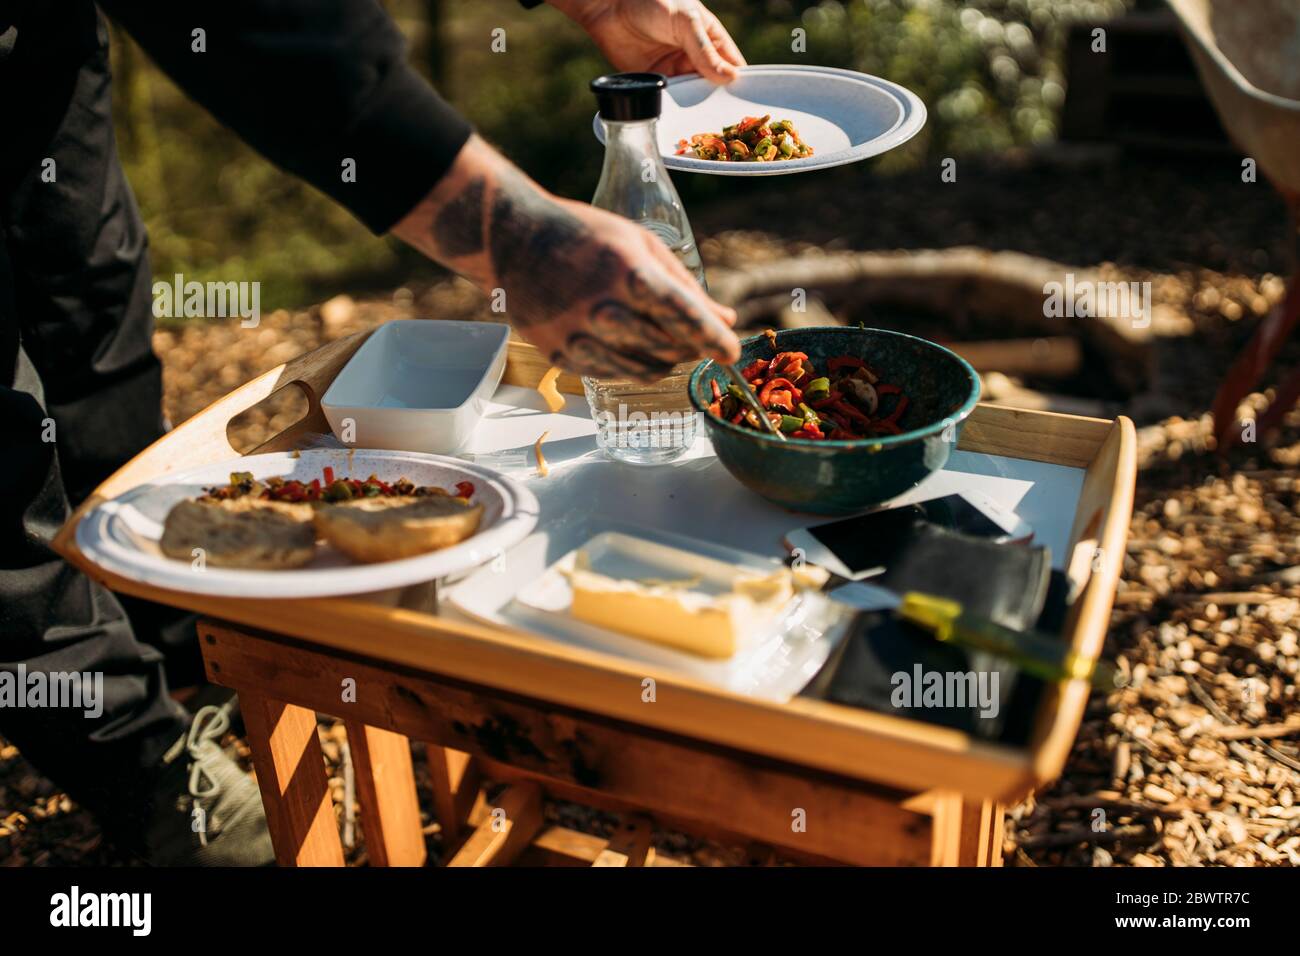 Close-up of tattooed man putting vegetarian meal on plate in garden Stock Photo